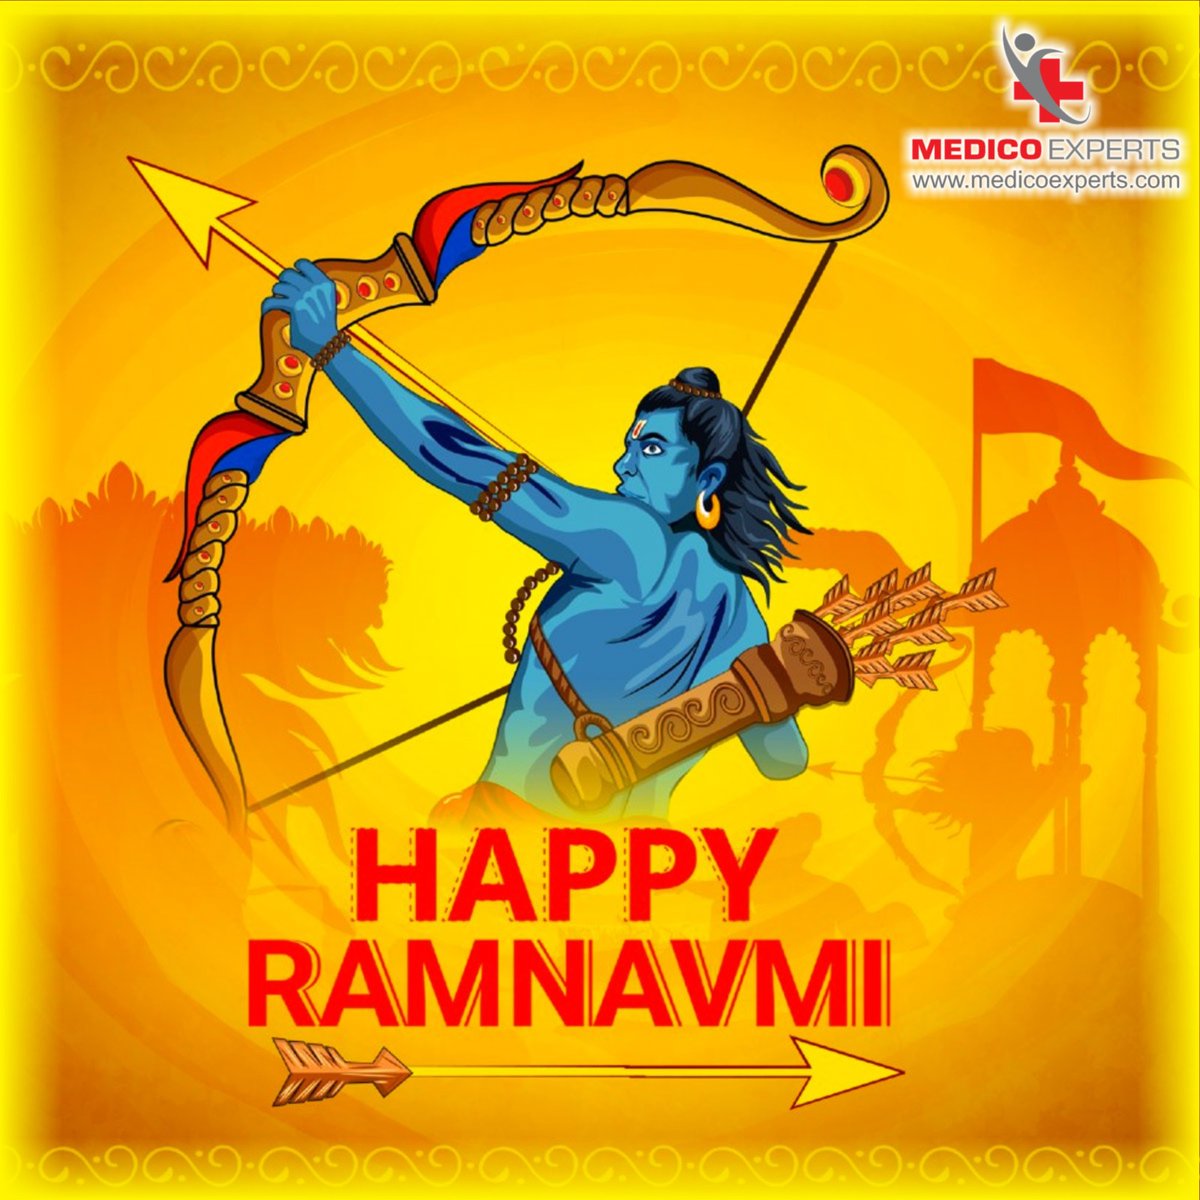 Happy Ram Navami! 🙏 Let's celebrate the birth of Lord Rama, the embodiment of righteousness and virtue. May his blessings illuminate our lives with peace and prosperity. #RamNavami #FestivalOfFaith